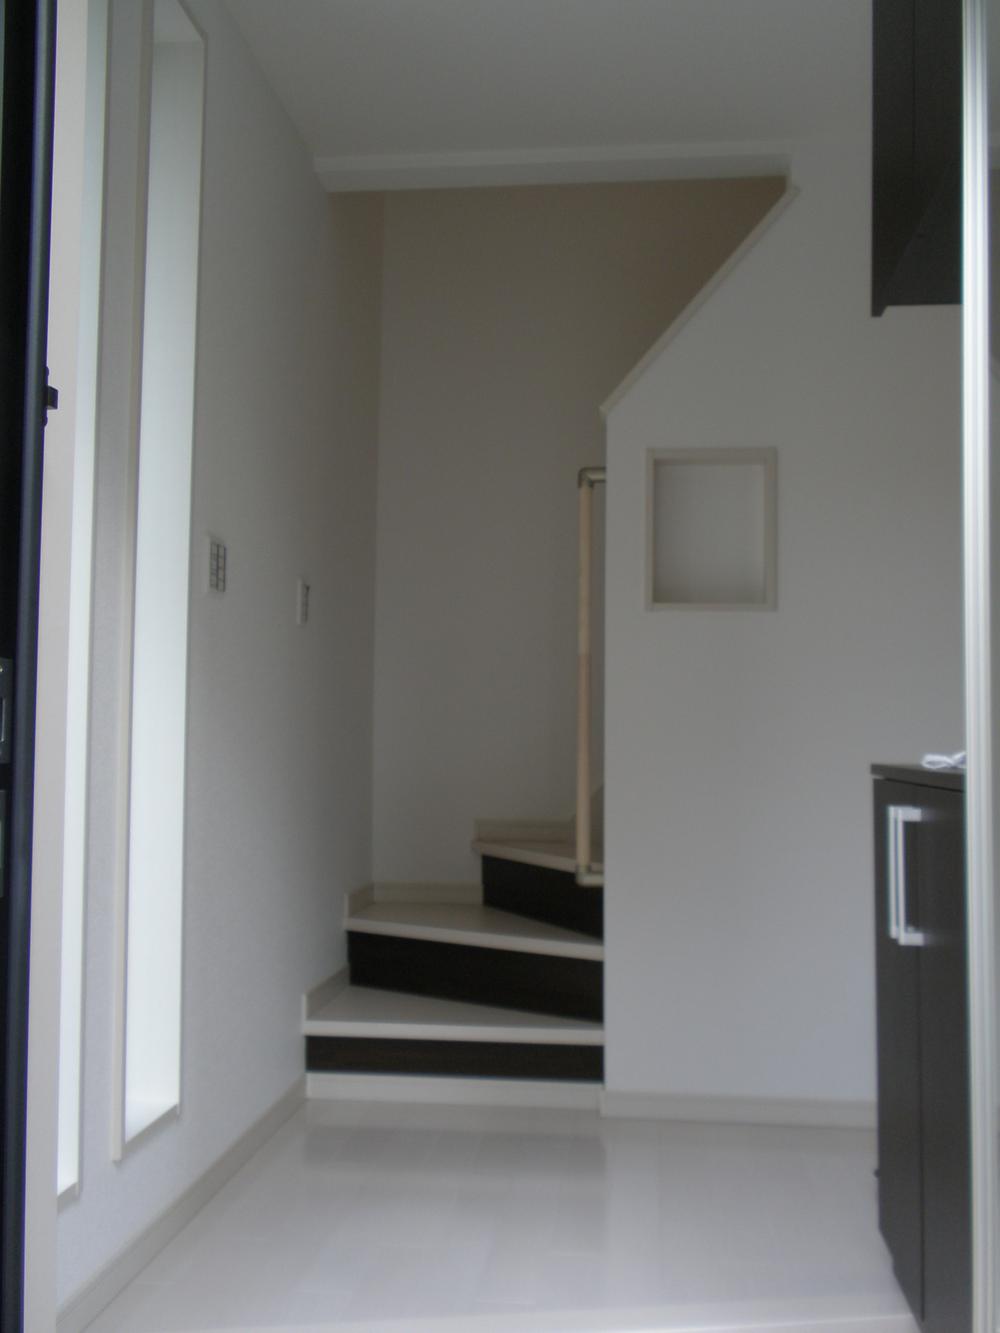 Same specifications photos (Other introspection). Entrance stairs part is available color-coded